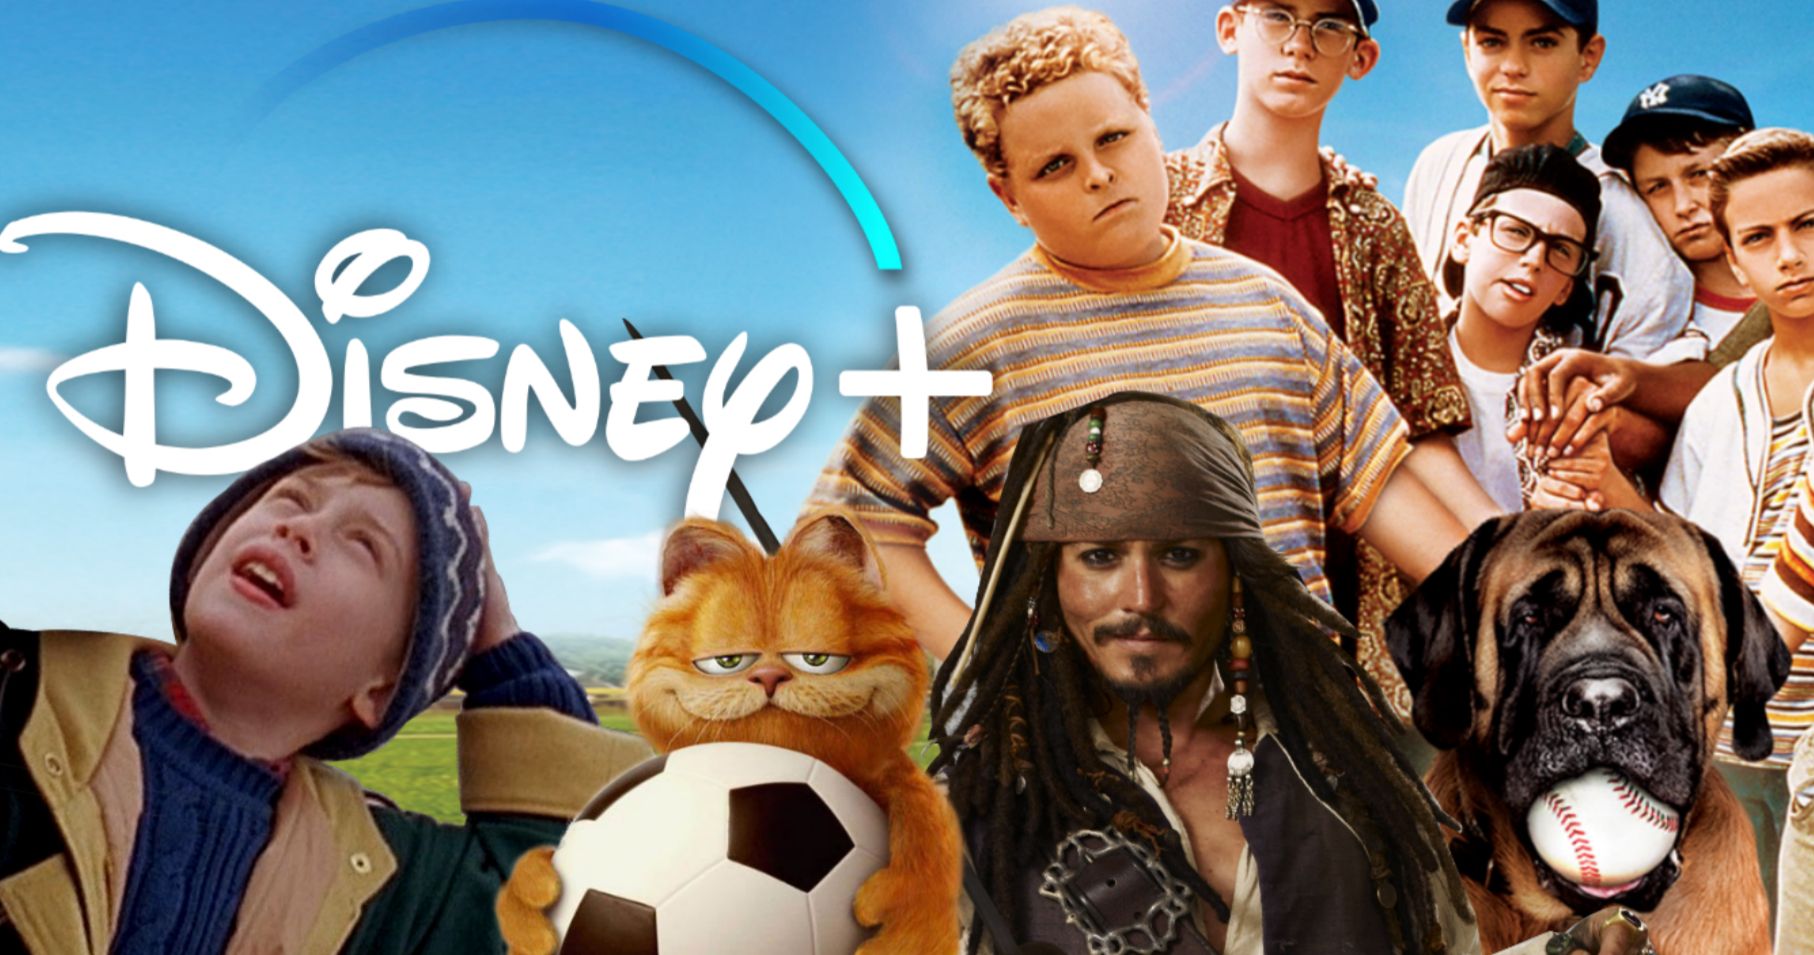 Disney Plus Explains Why Some Movies Are Leaving, Promises They'll Return